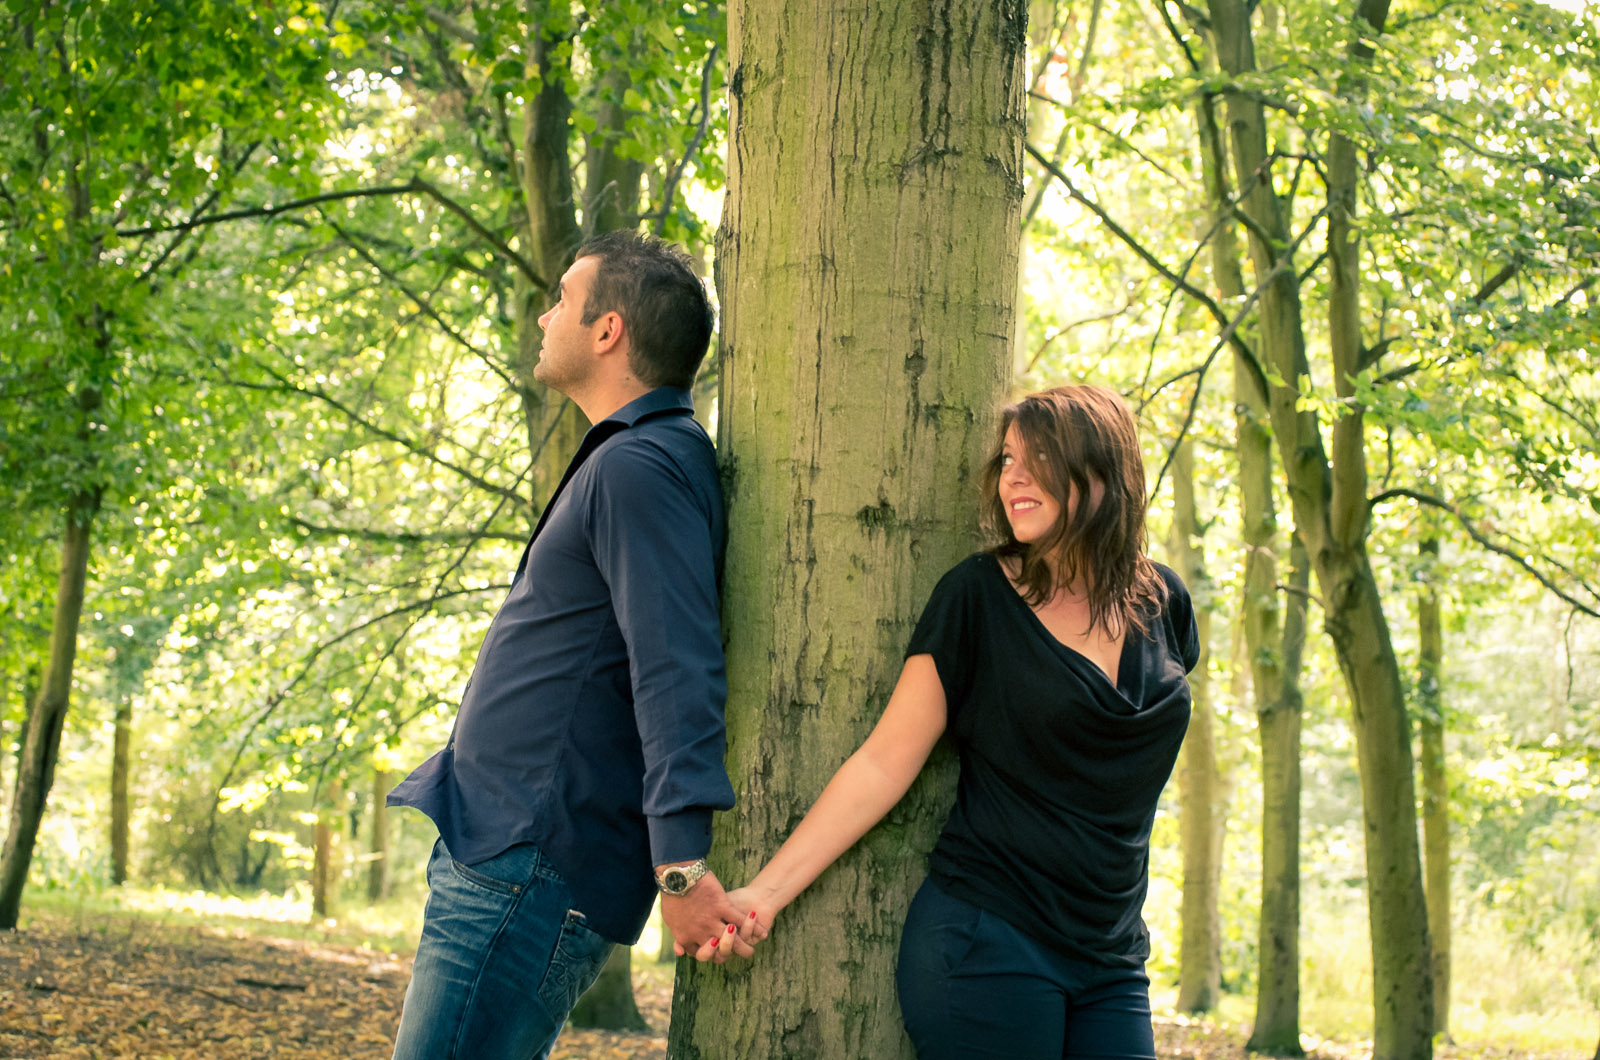 Engagement Session of Delphine and Thibault: Capture the chemistry